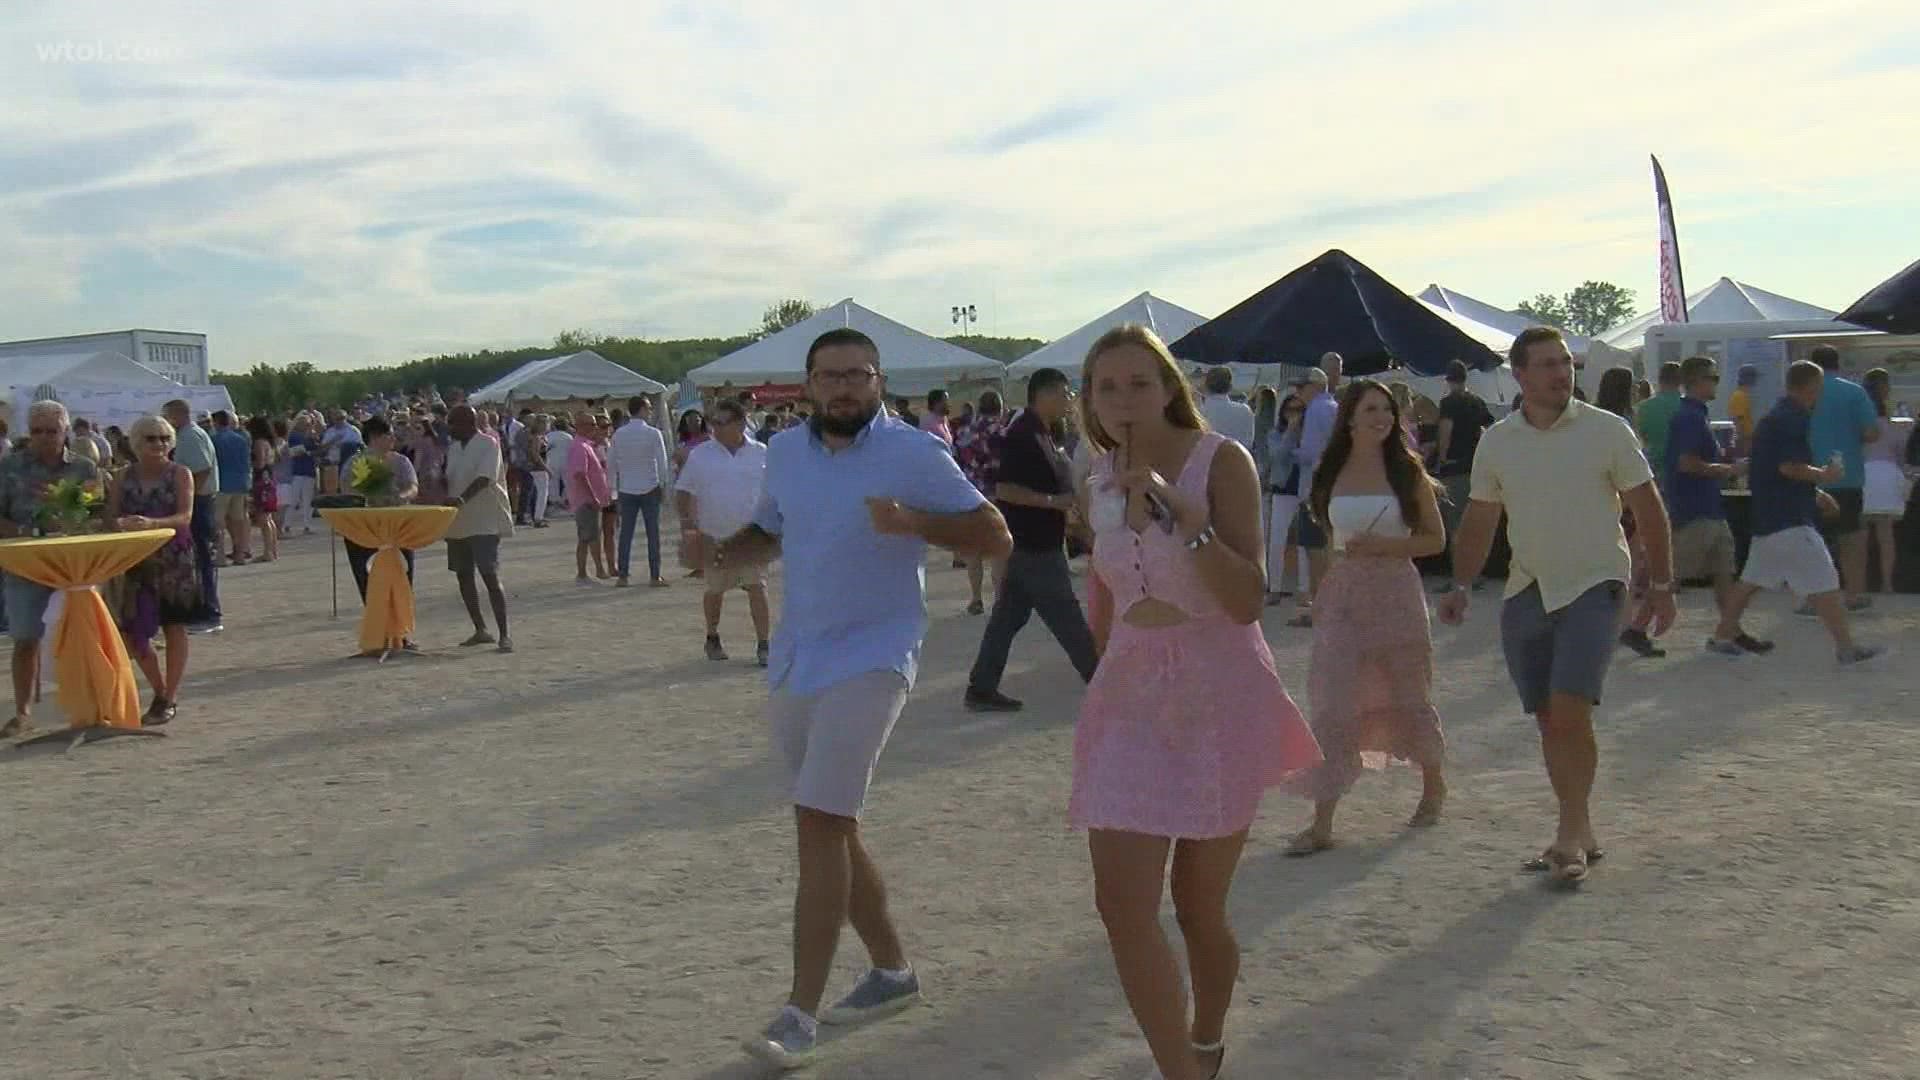 The beach party is held at Maumee Bay State Park,  raising hundreds of thousands for programs that help local kids